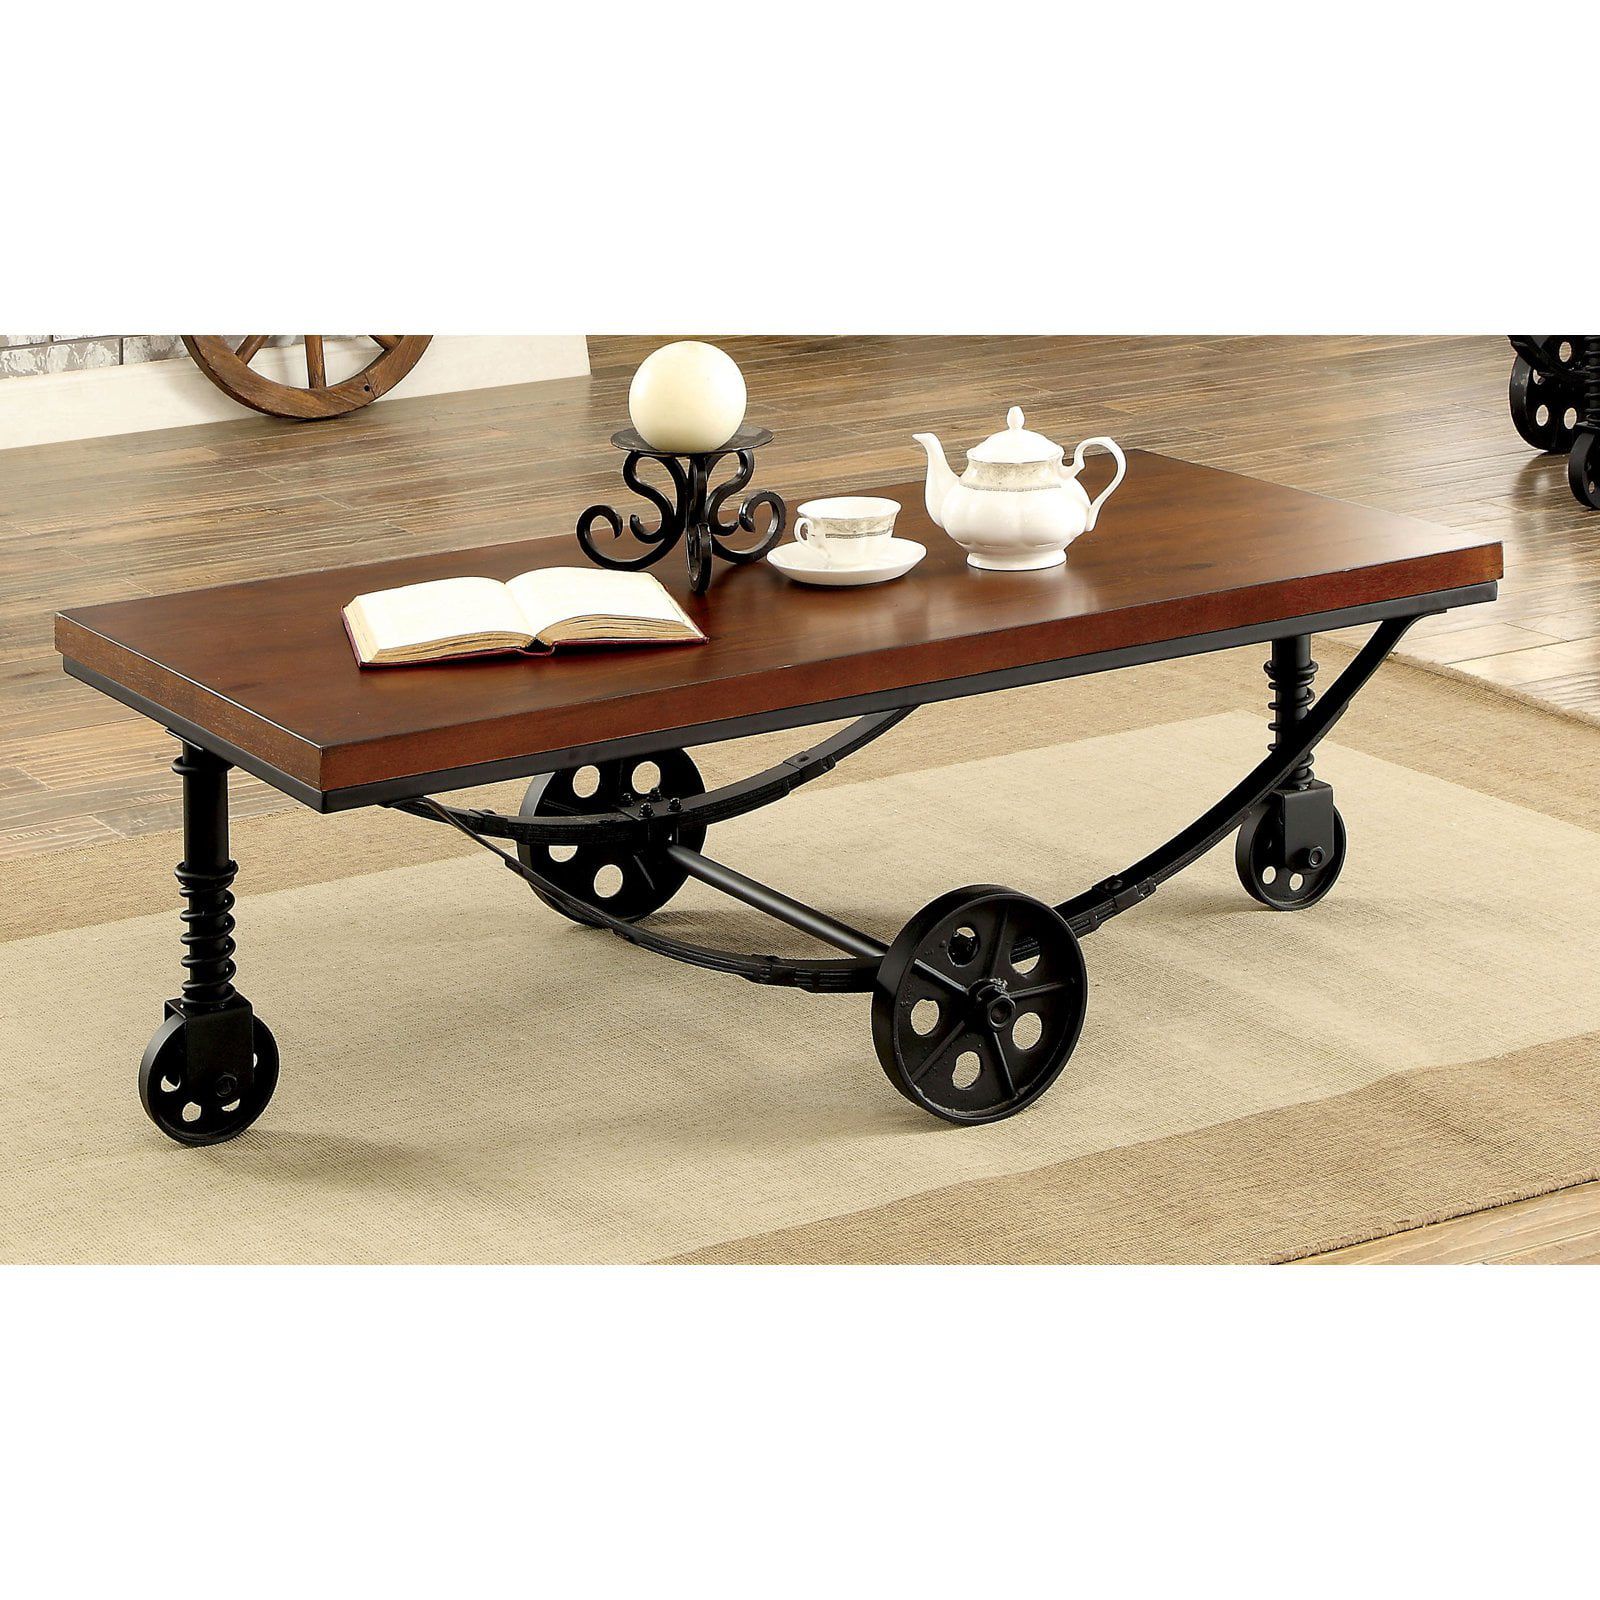 Furniture Of America Mator Industrial Style Caster Wheel Coffee Table Throughout Coffee Tables With Casters (View 3 of 21)